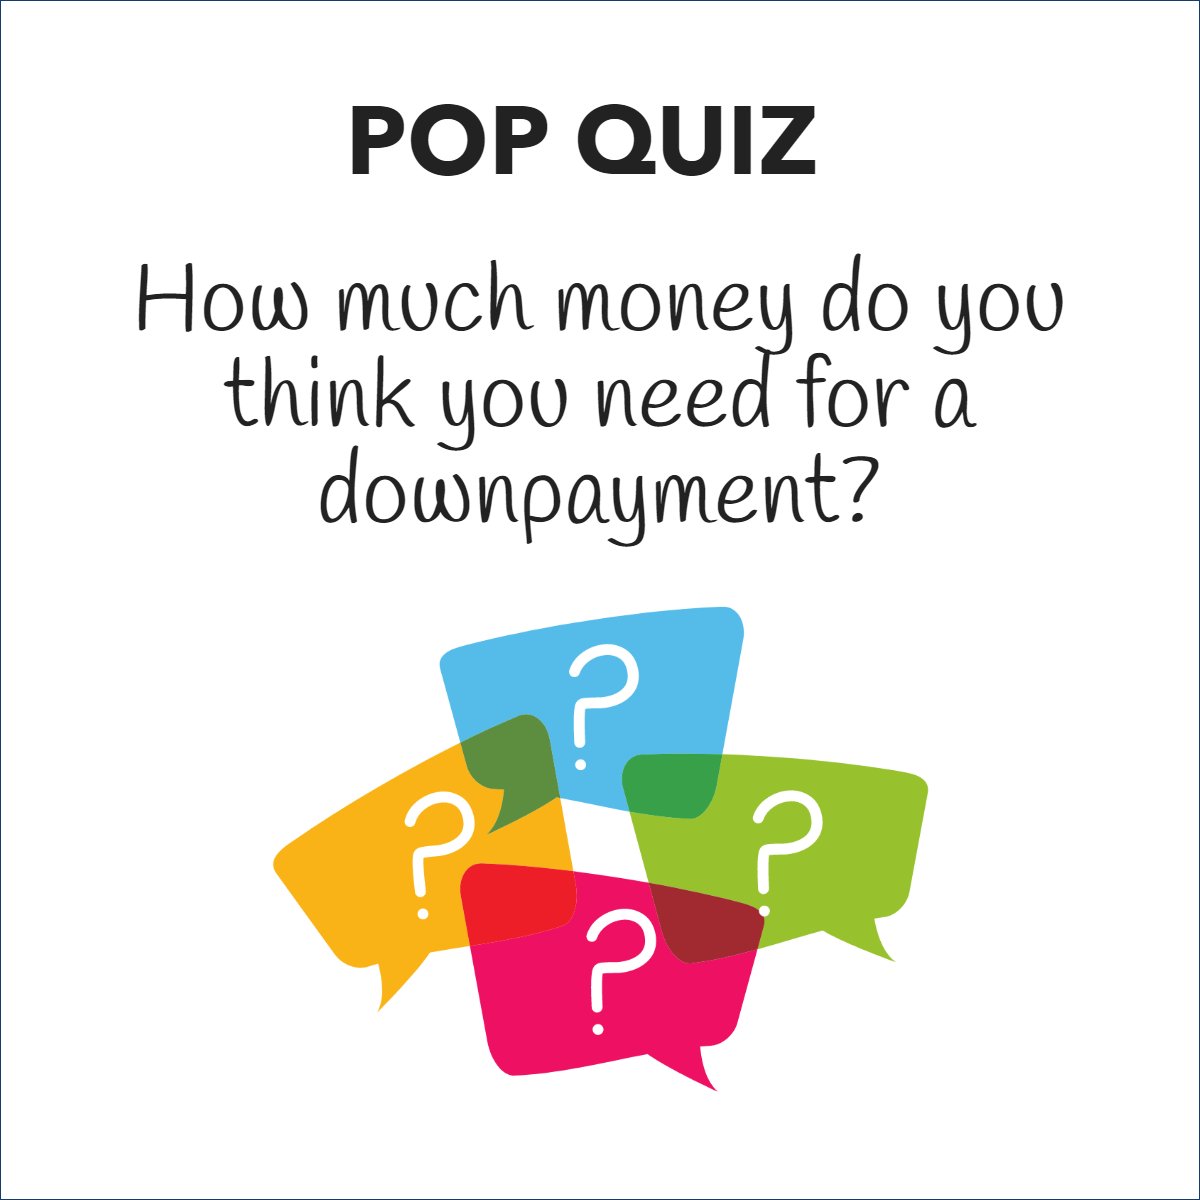 Fast Fact:

While a 20% down payment was once the standard, many homebuyers now pay 5% or less. 💰

#realestate #realestatetips #downpayment #downpaymentassistance #popquiz #realestate101